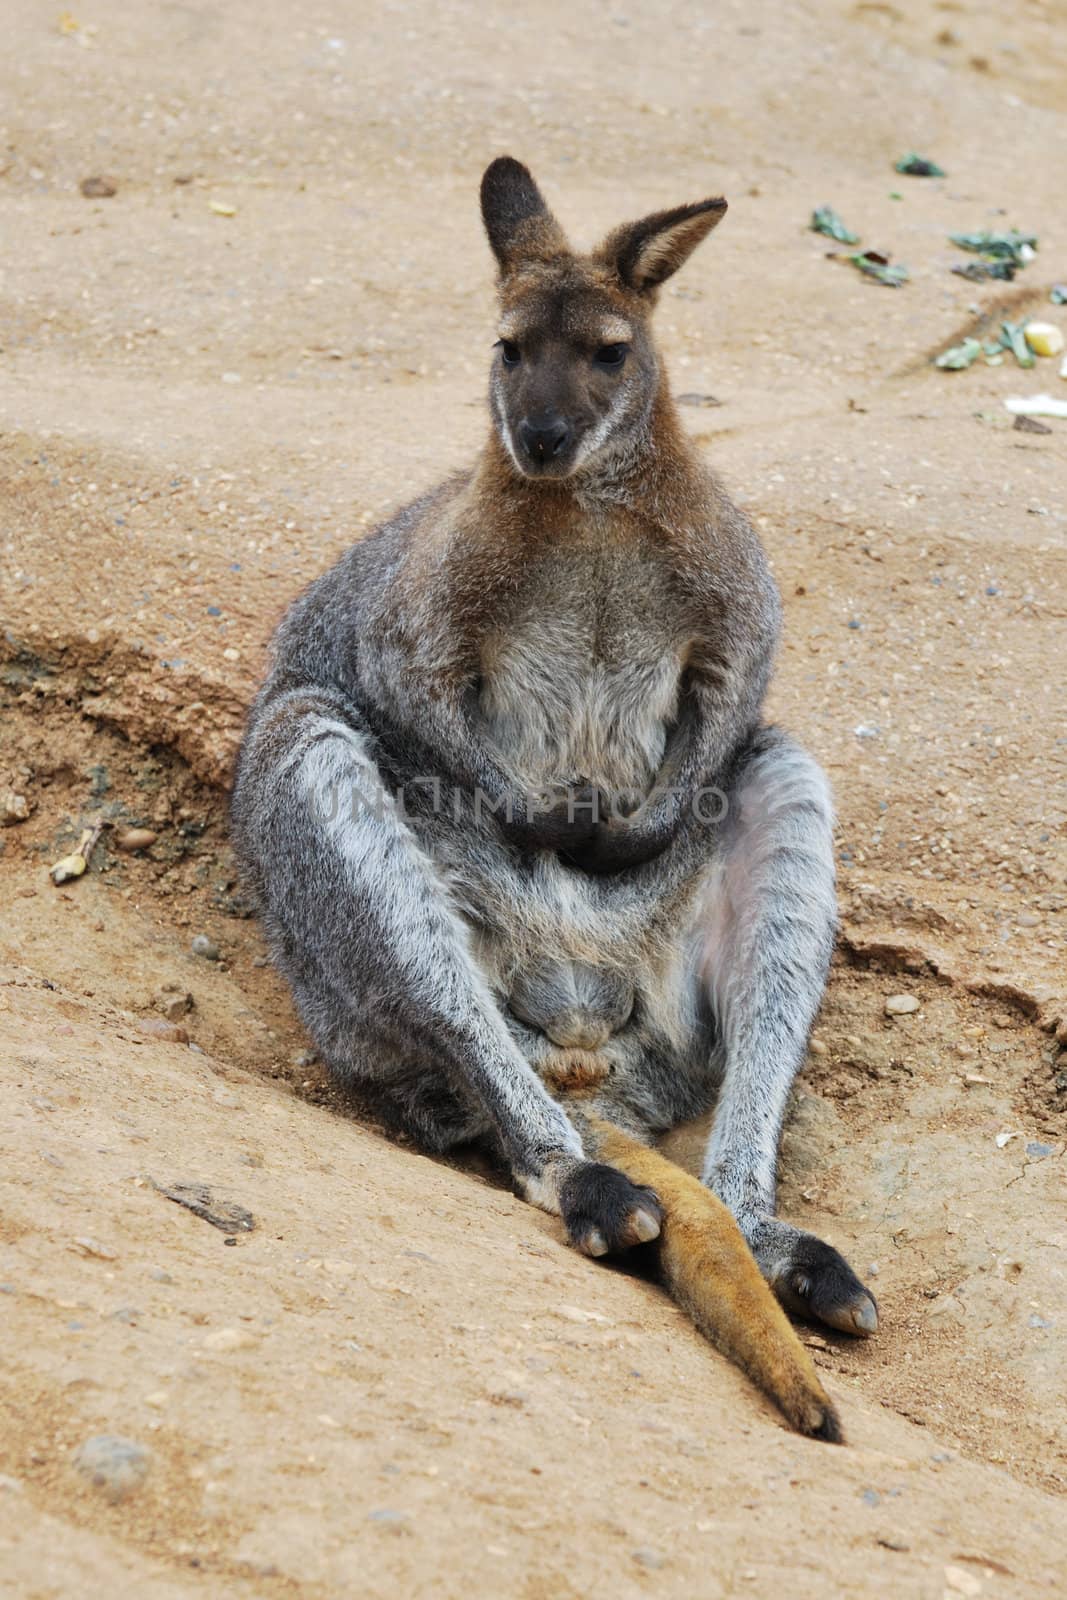 Wallaby sitting on slope